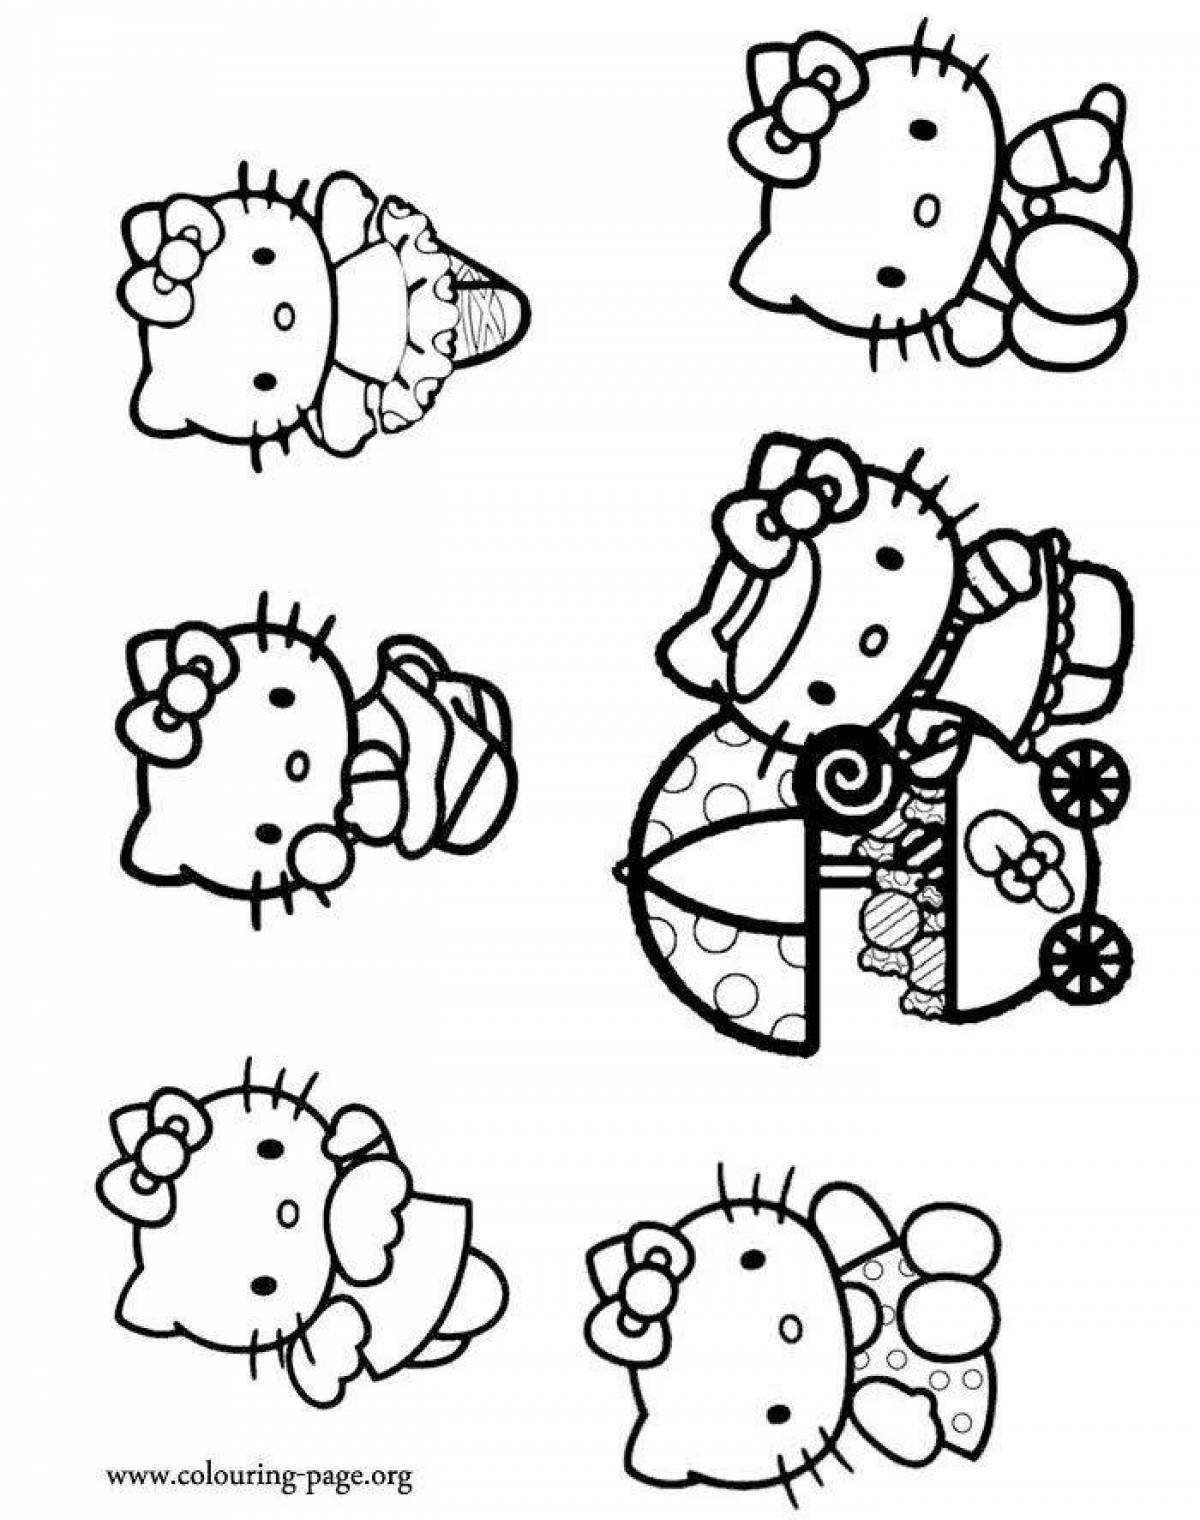 Coloring page of funny hello kitty stickers